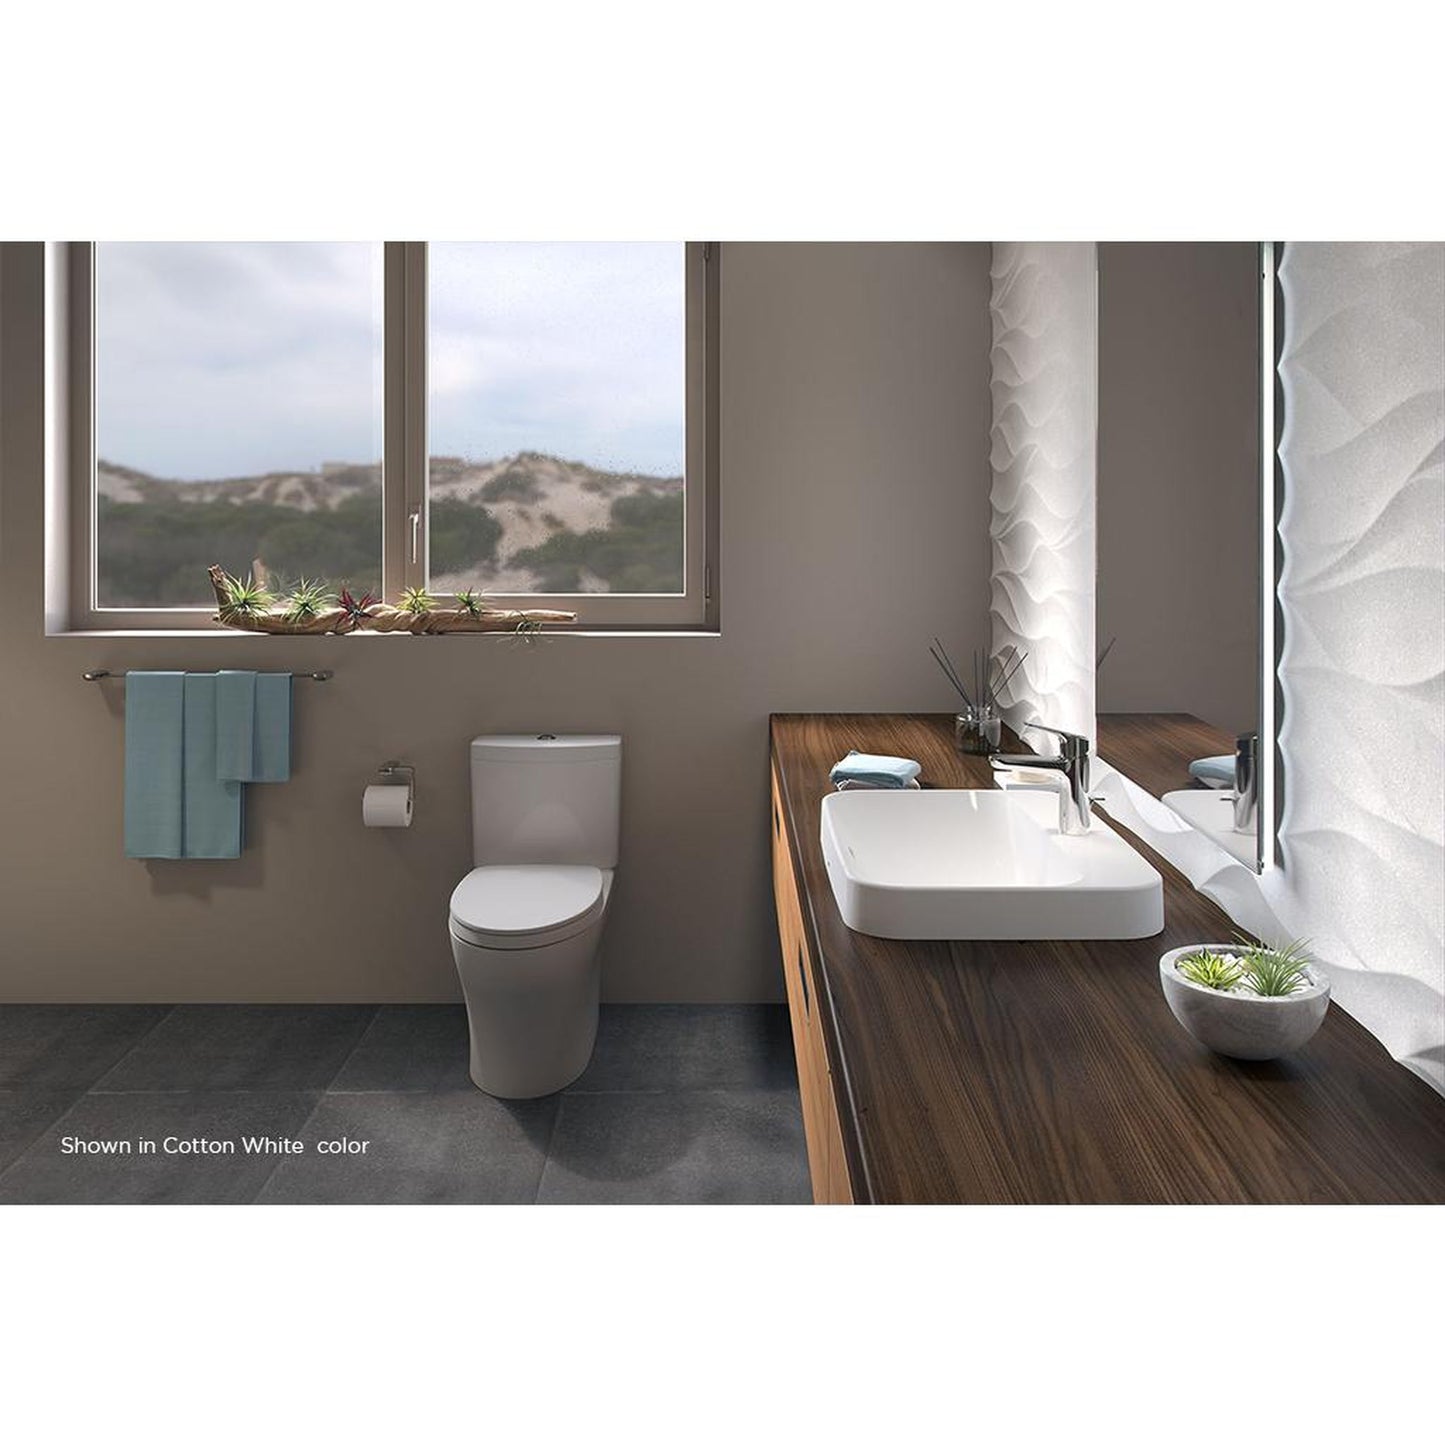 TOTO Aquia IV Colonial White 1.0 GPF & 0.8 GPF Dual-Flush Two-Piece Elongated Toilet With WASHLET+ Connection - SoftClose Seat Included